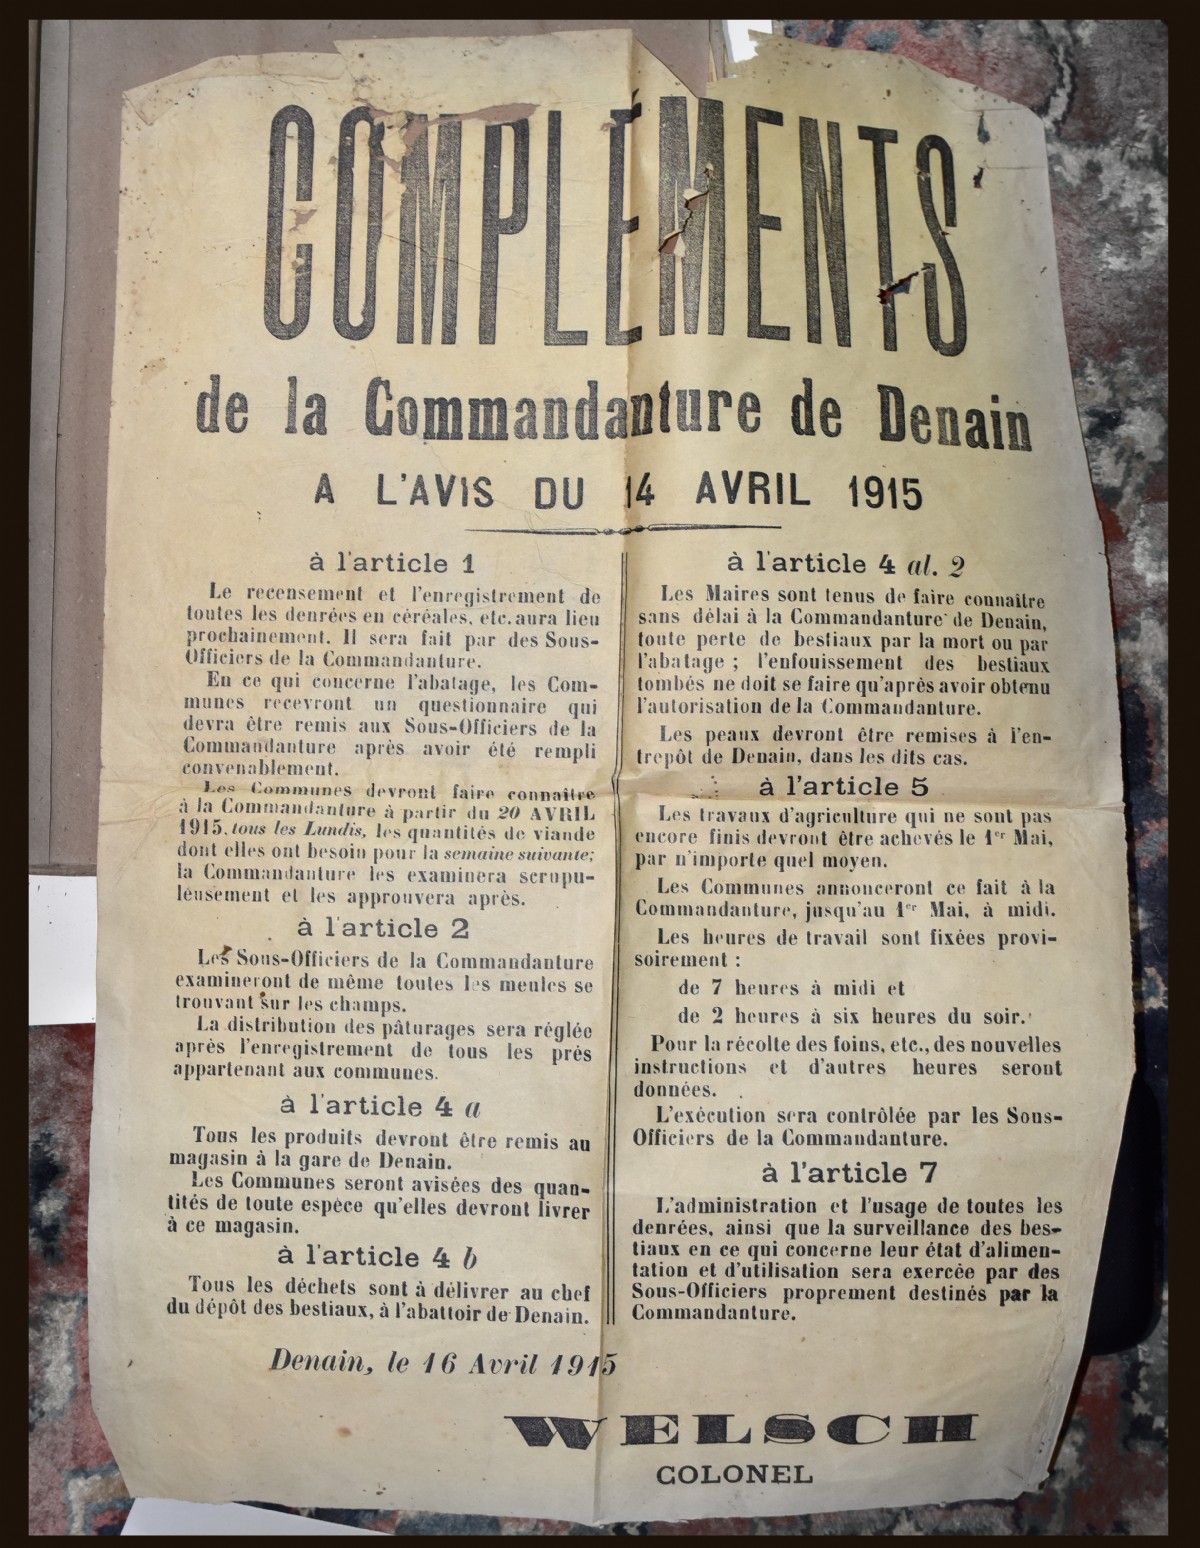 Denain occupation poster concerning agricultural times of work and other details